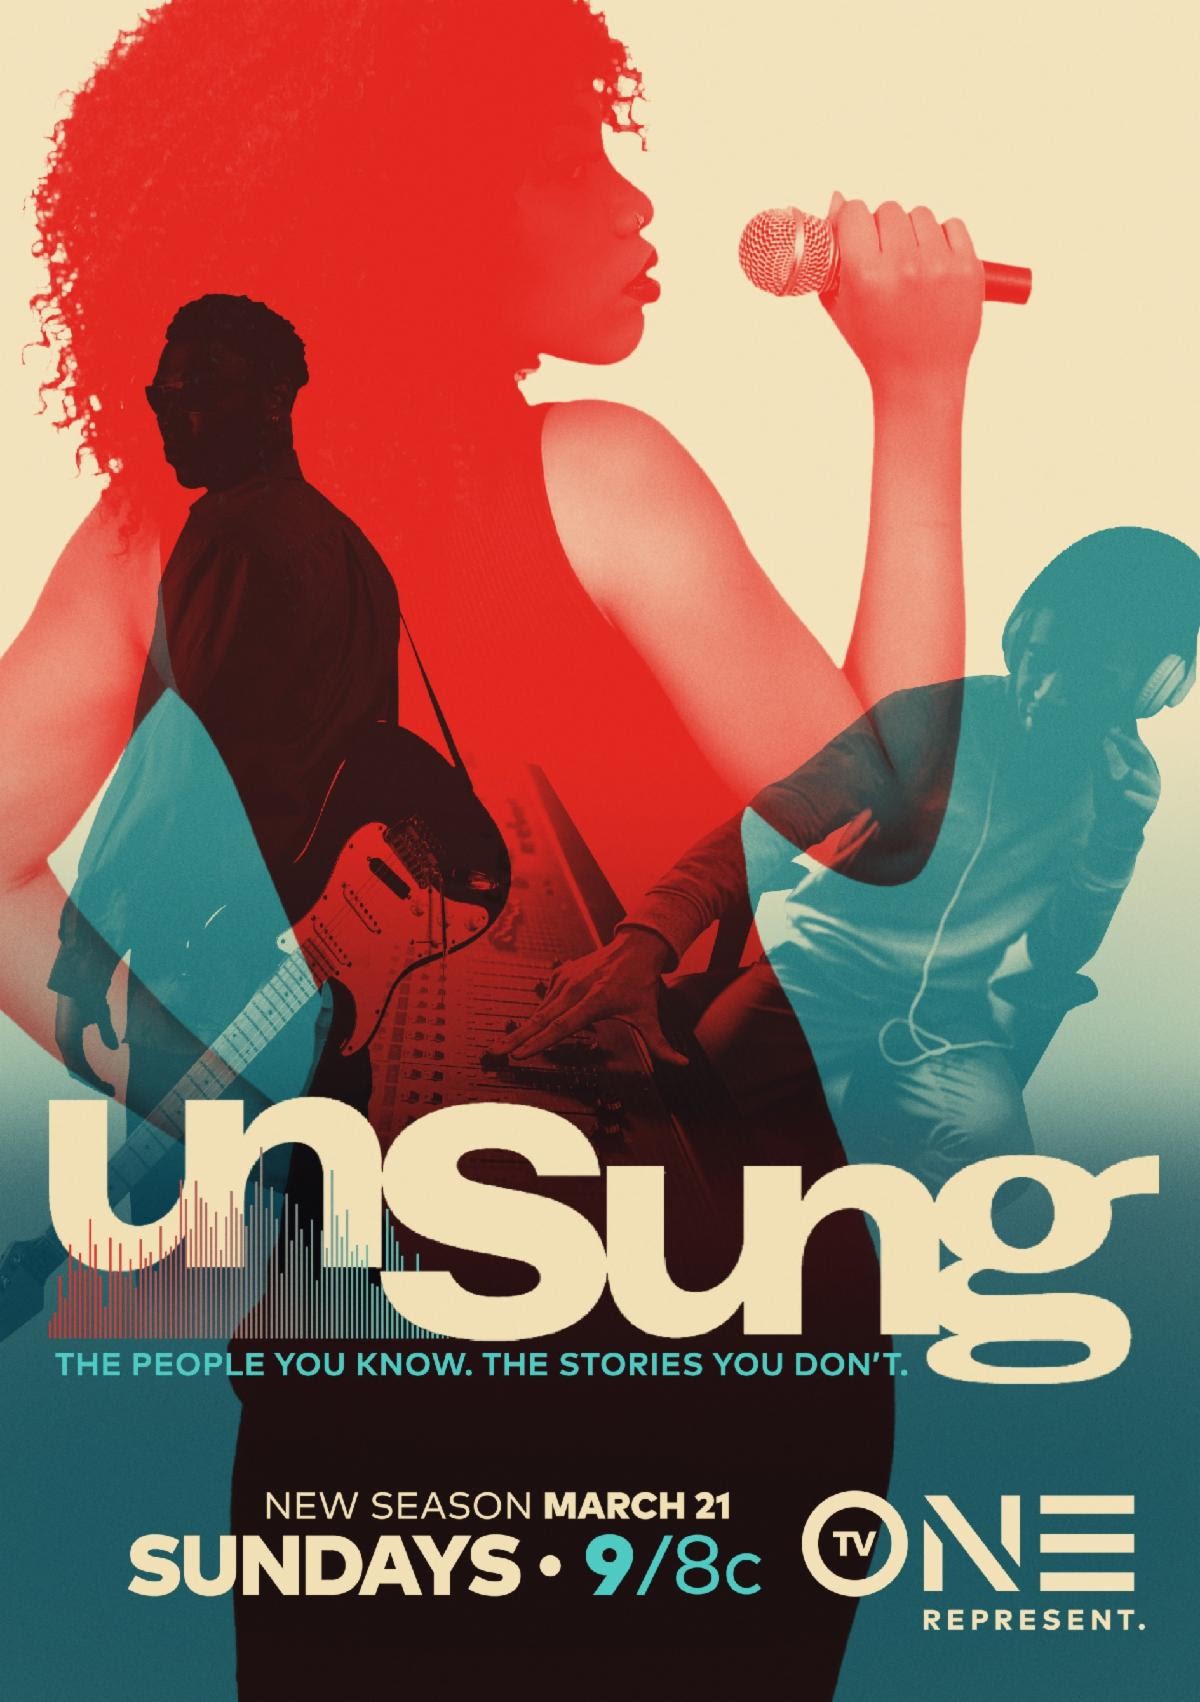 TV ONE’S CRITICALLY ACCLAIMED SERIES UNSUNG RETURNS WITH ALLNEW